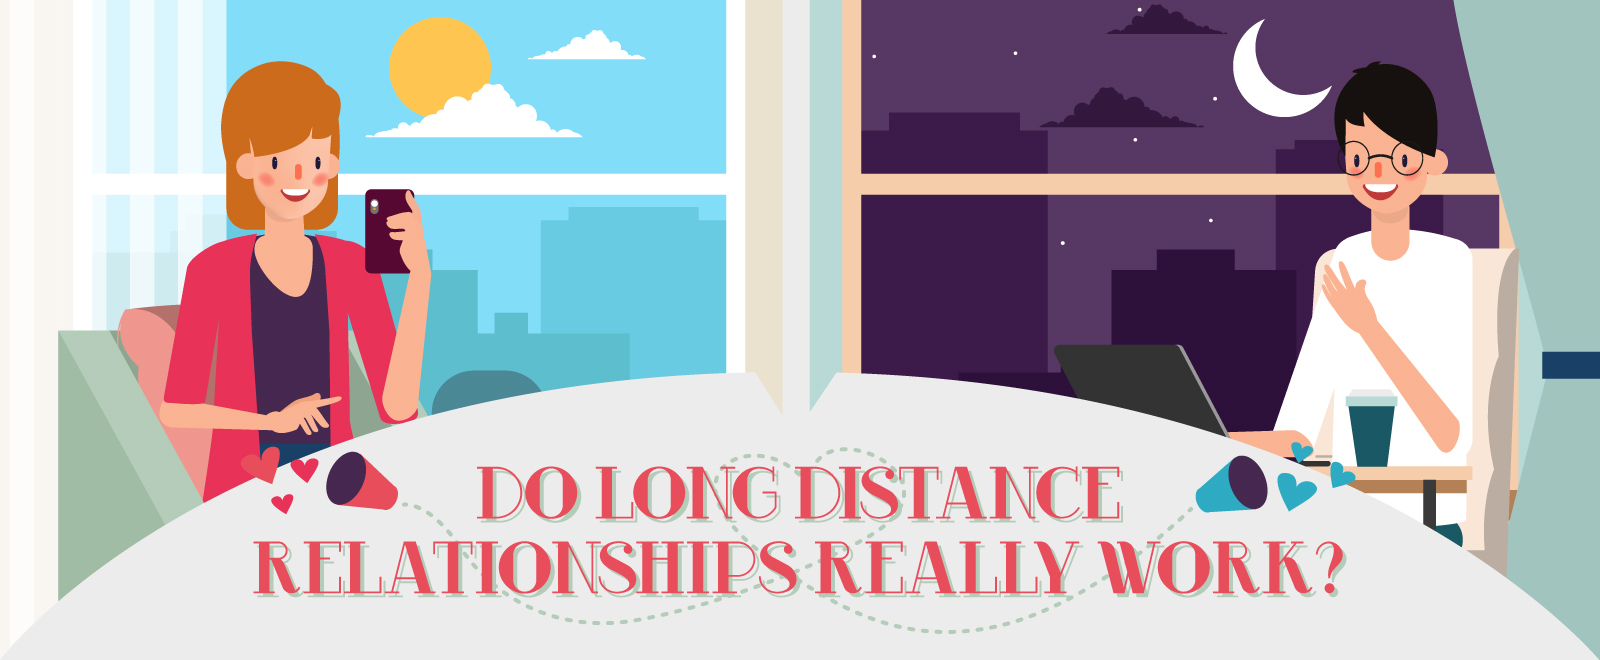 Do you believe in long distance relationships?” — To Whom It May Concern